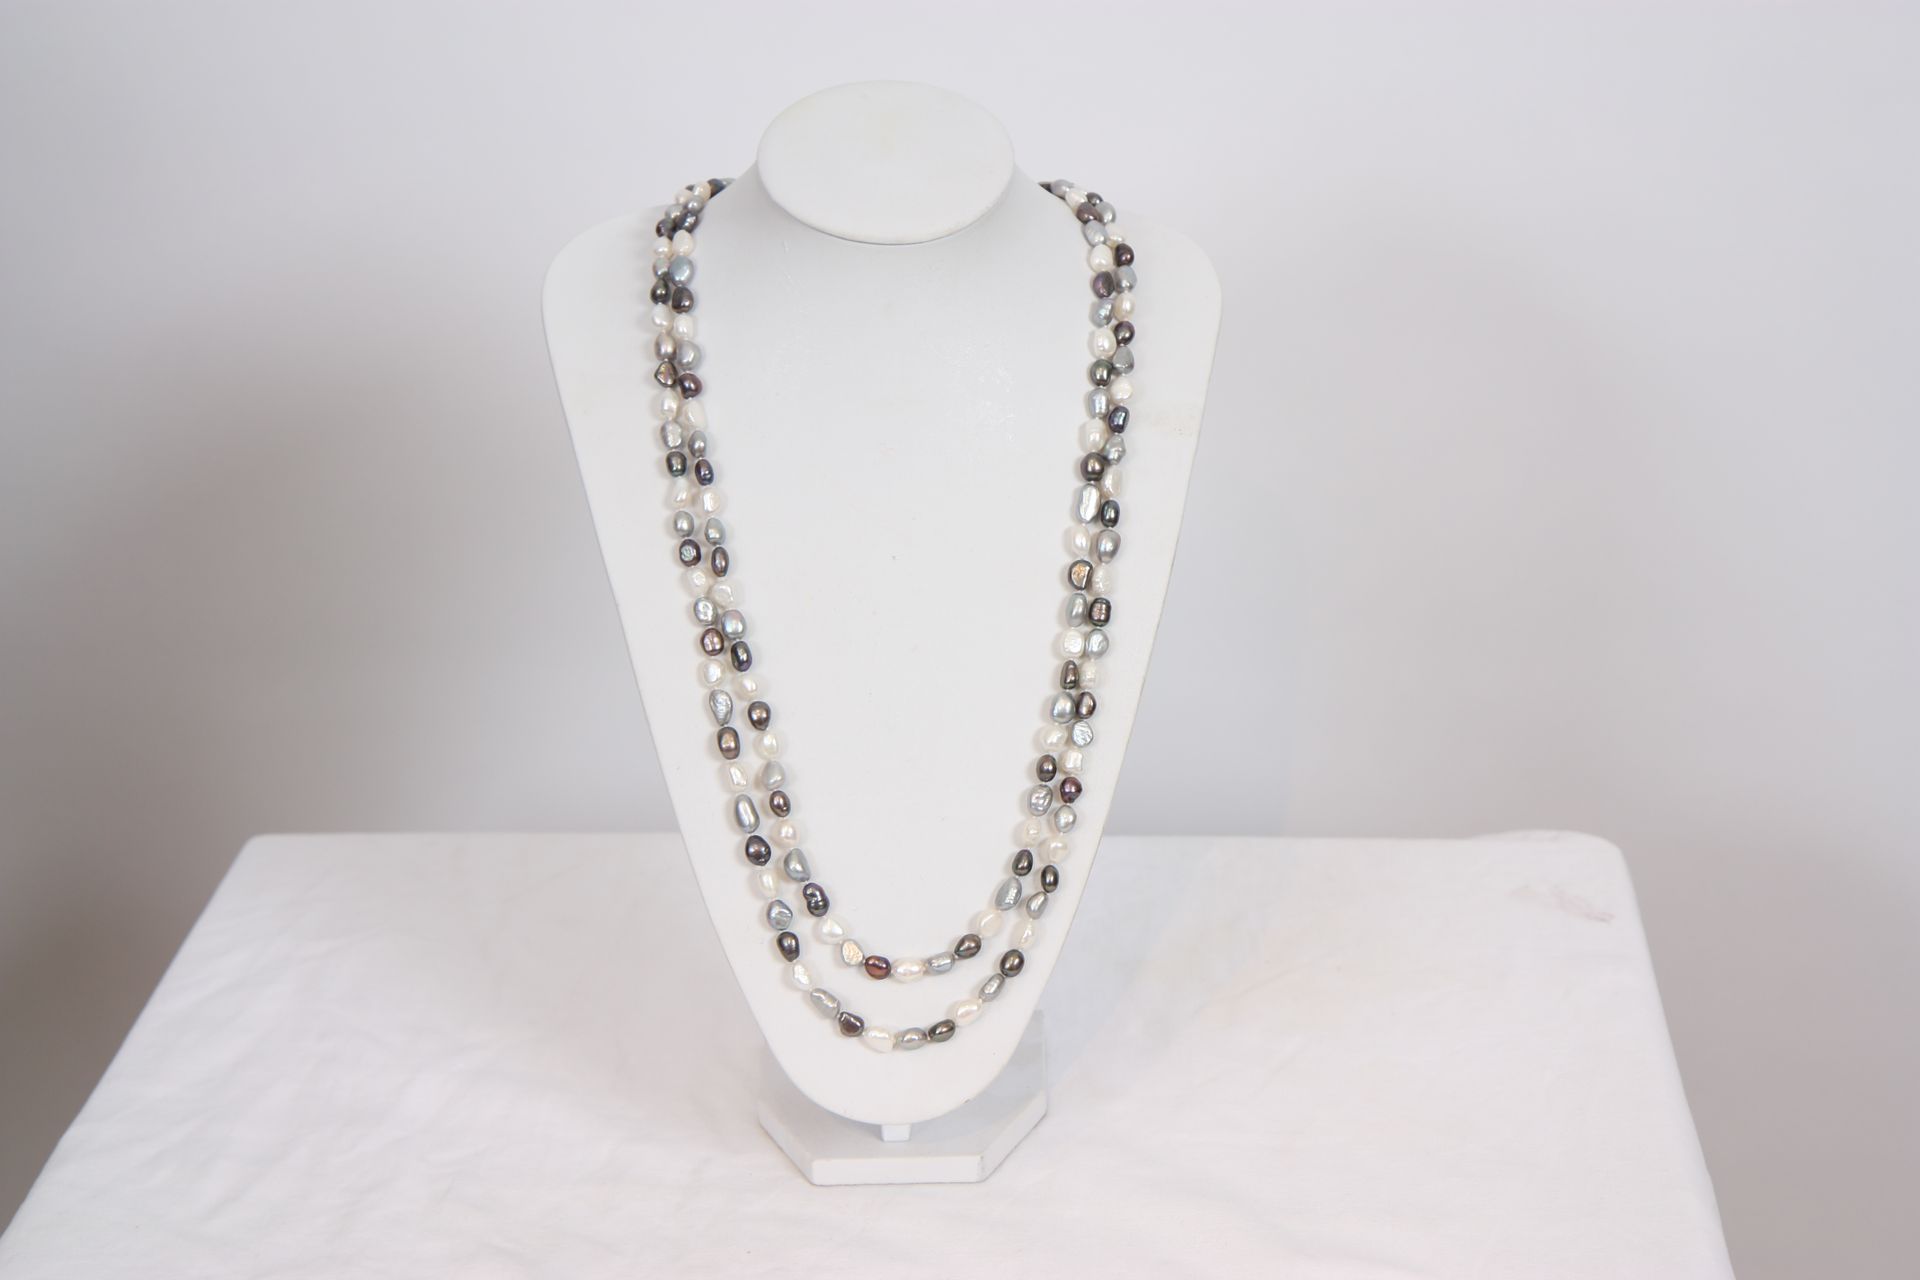 Null NECKLACE OF OVAL BAROQUE PEARLS

L pearls : 1 cm approx.

L : 180 cm